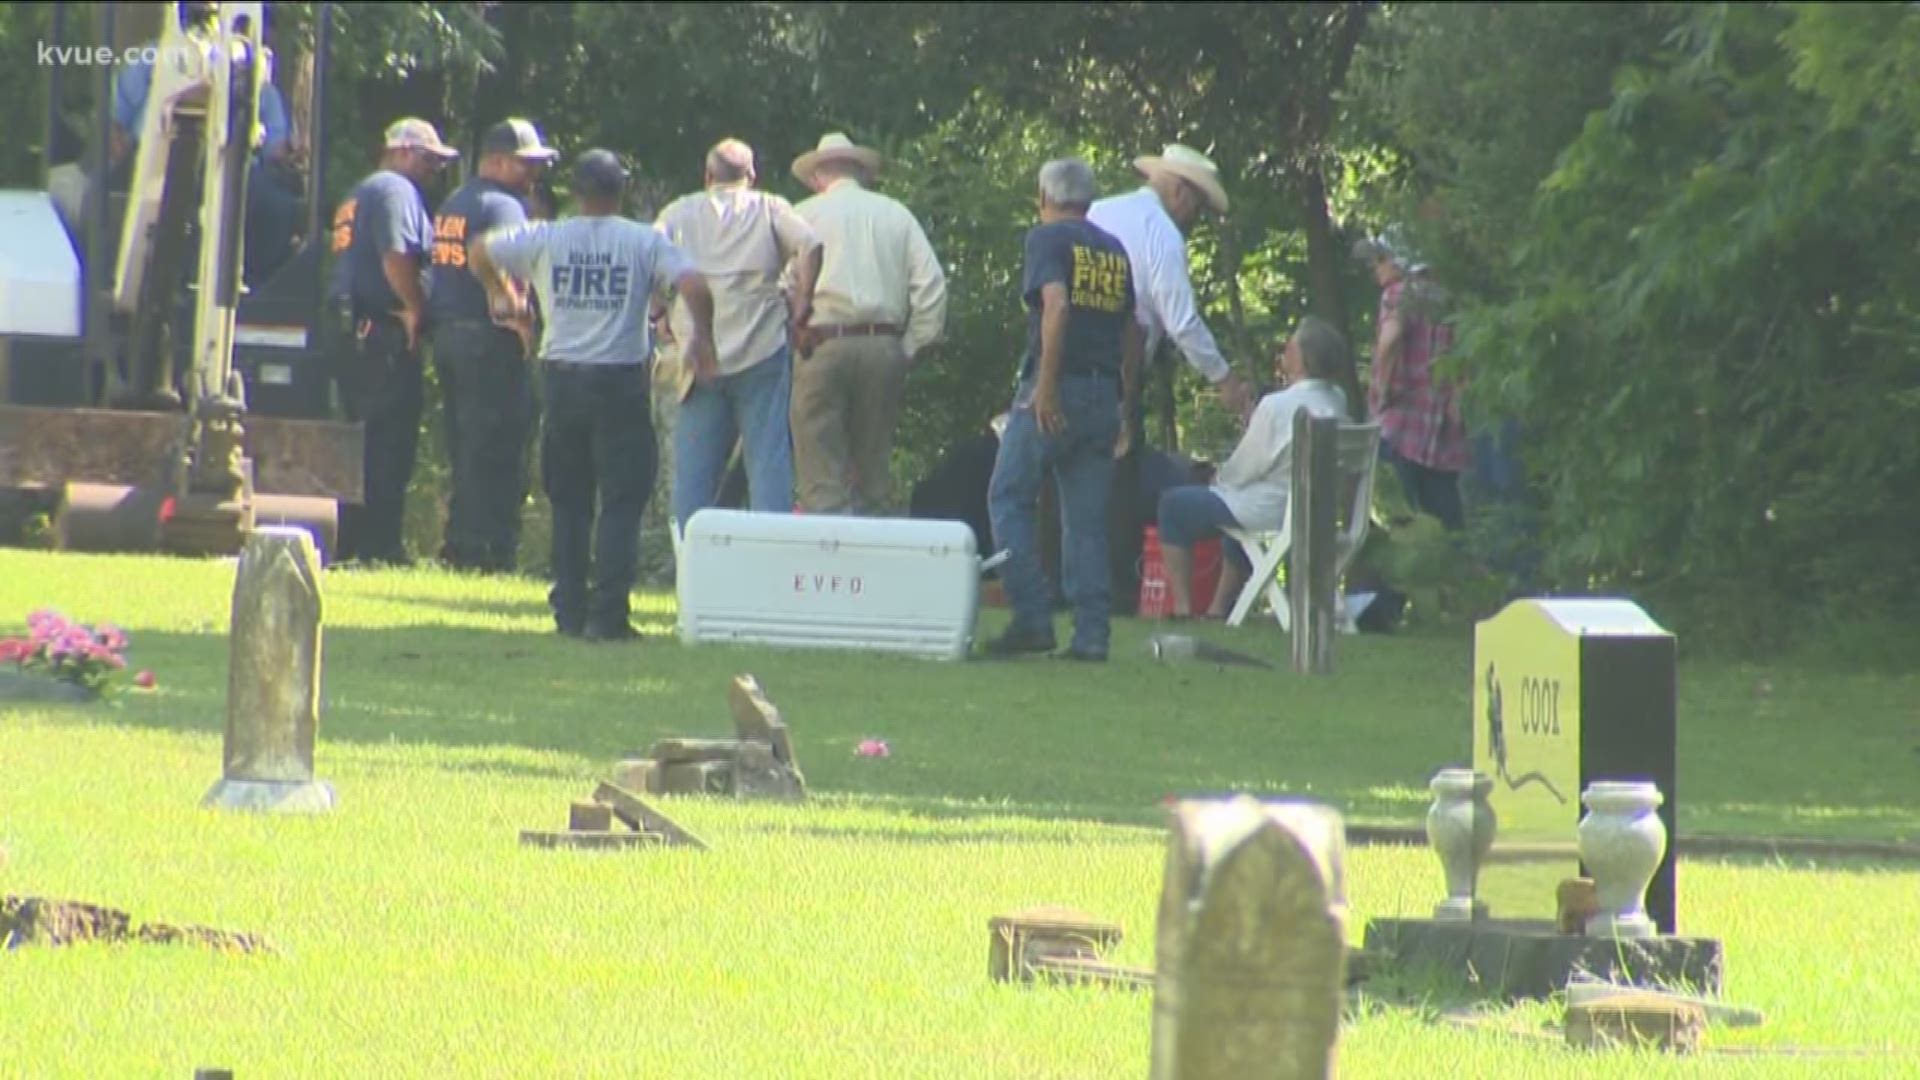 The woman was buried as a "Jane Doe" at an Elgin cemetery 40 years ago.